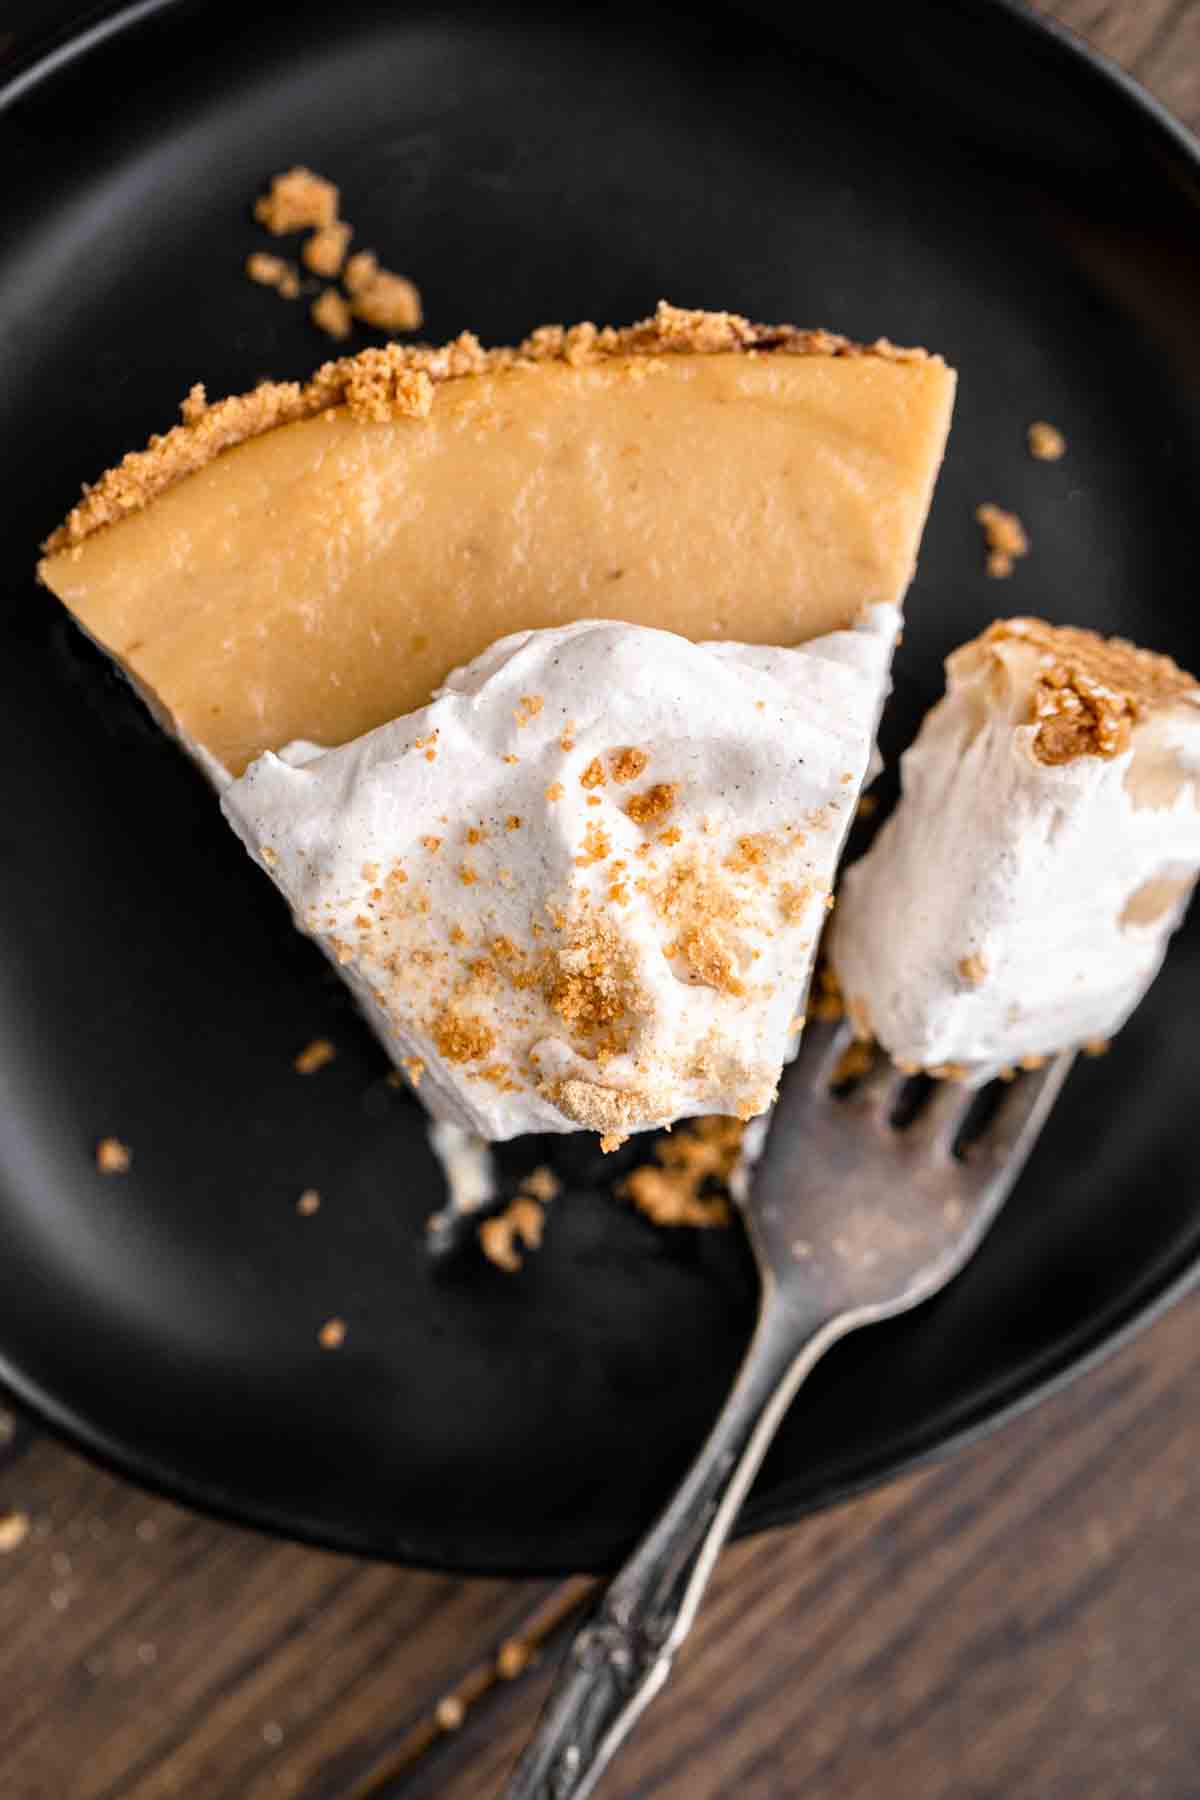 A slice of Butterscotch Cinnamon Pie with whipped cream.